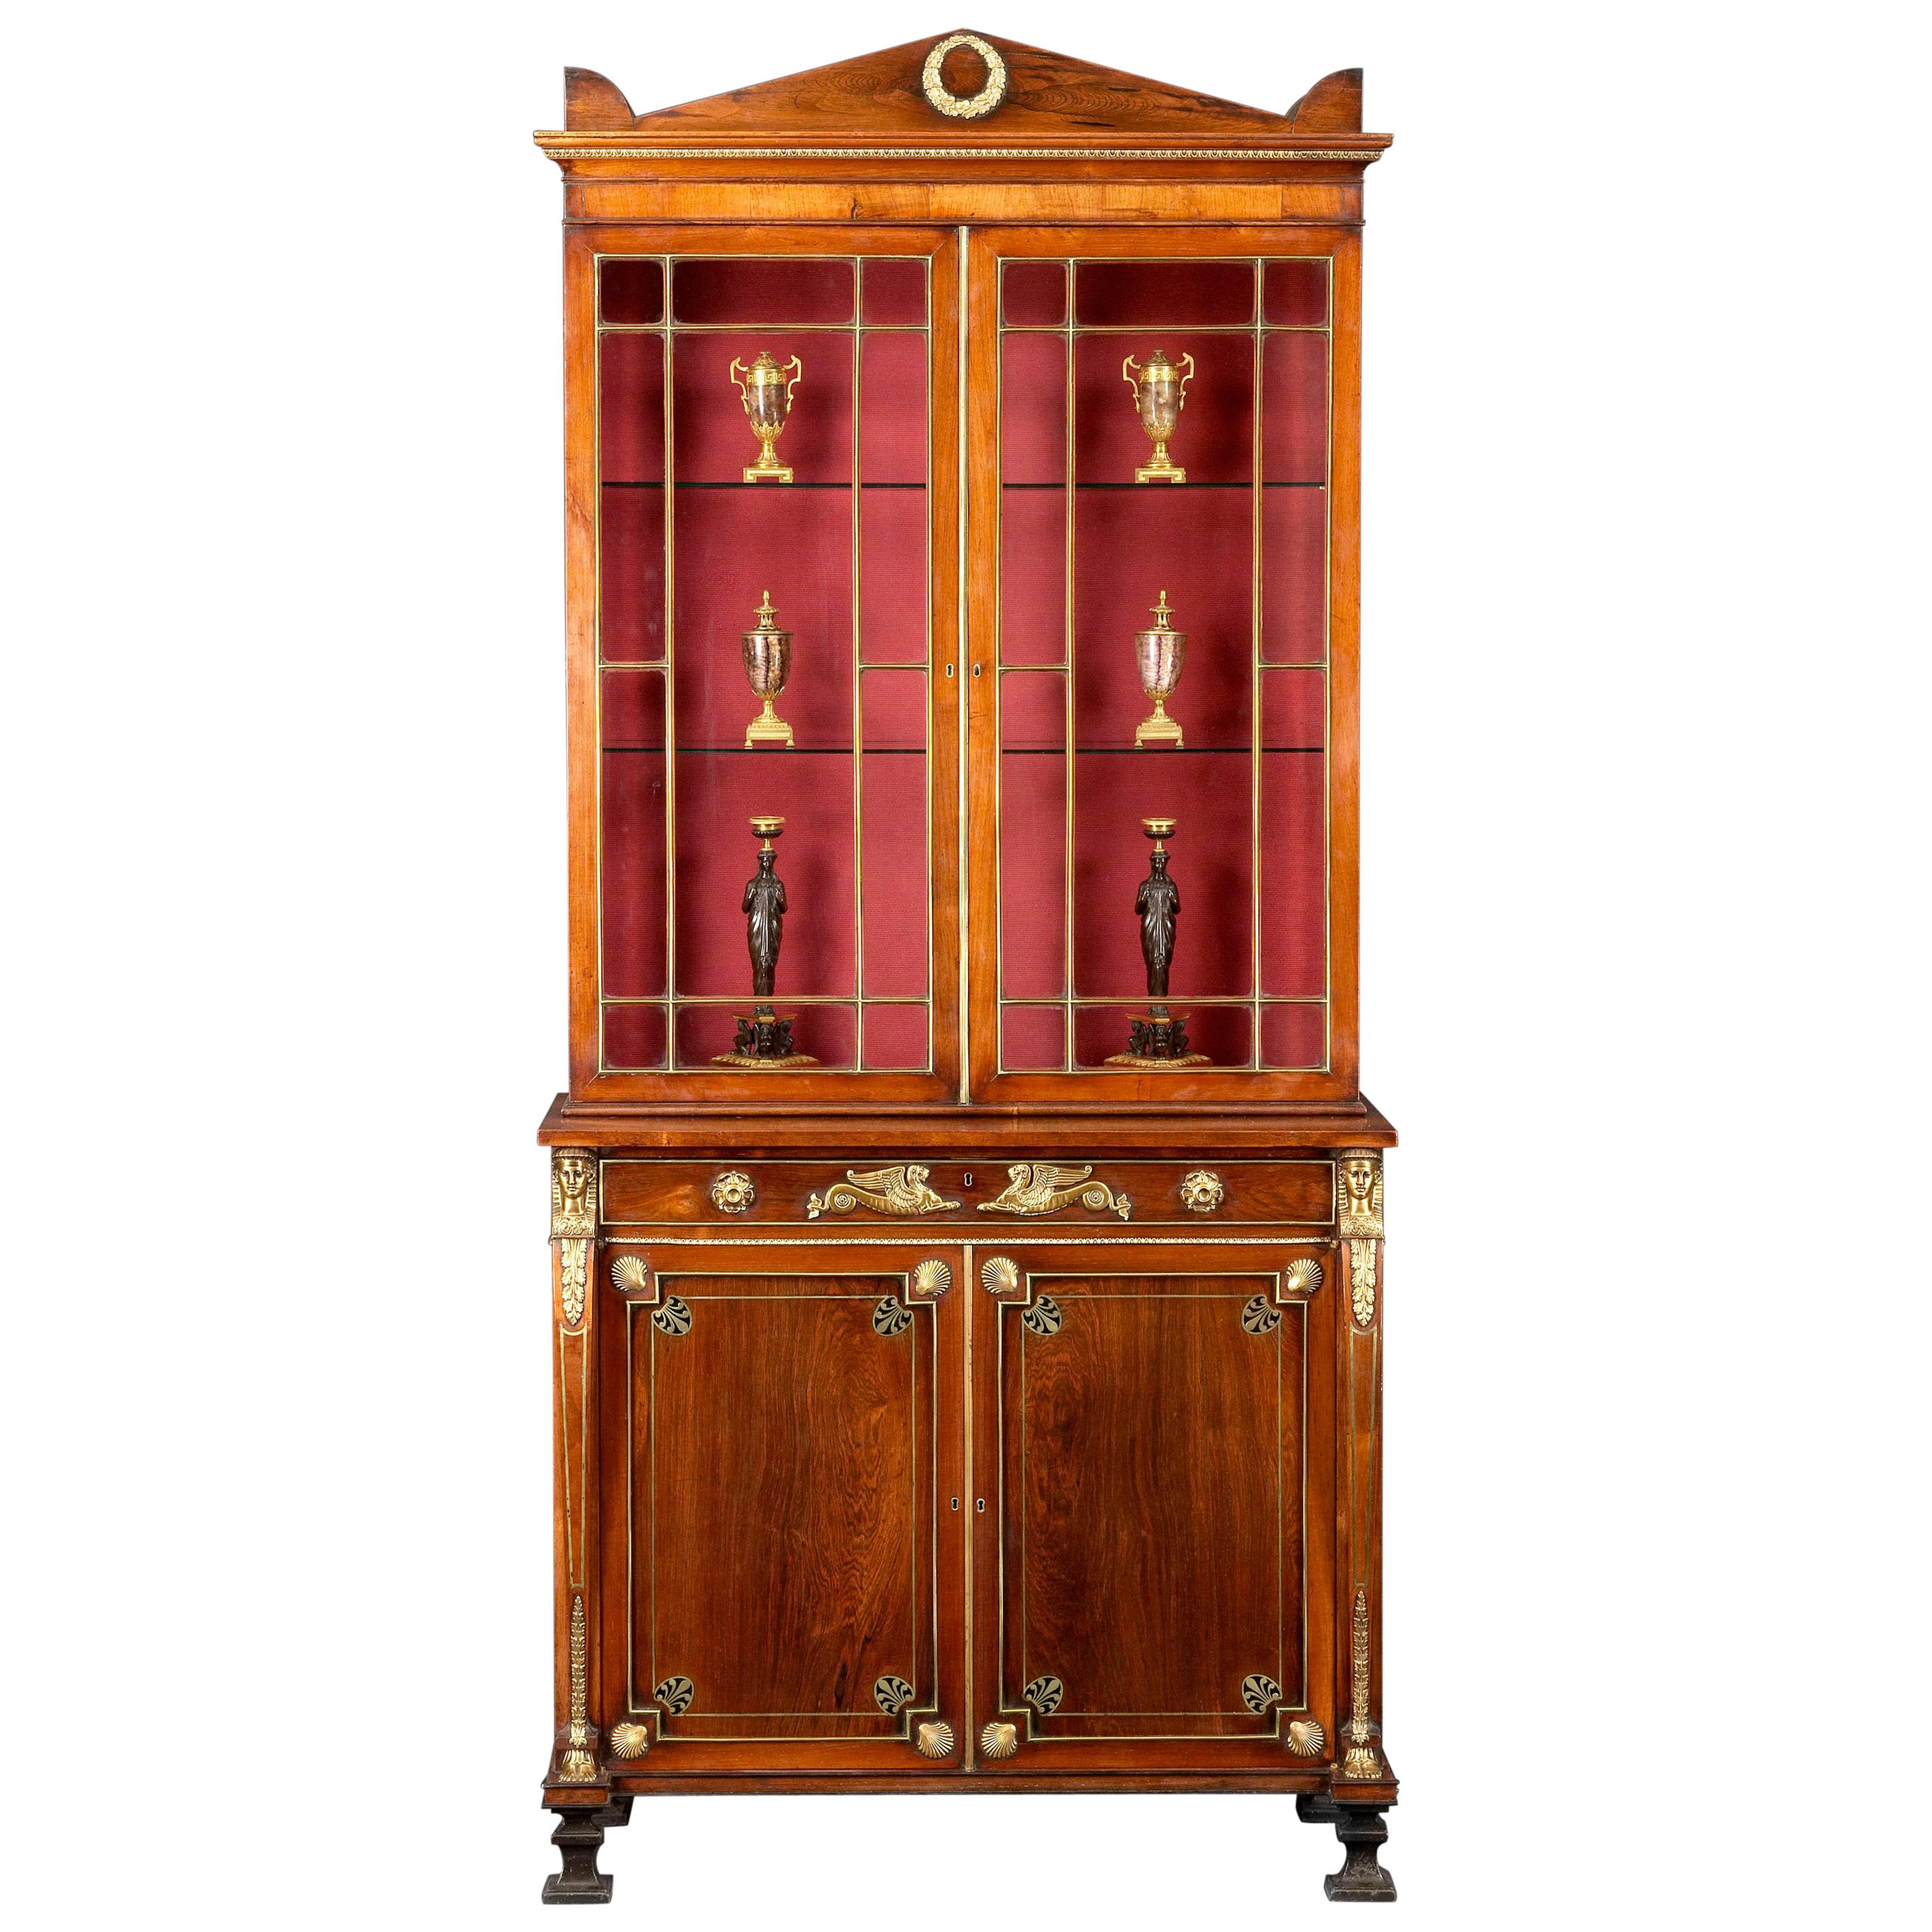 Early 19th Century Regency Period Rosewood and Ormolu Mounted Secretaire Cabinet For Sale